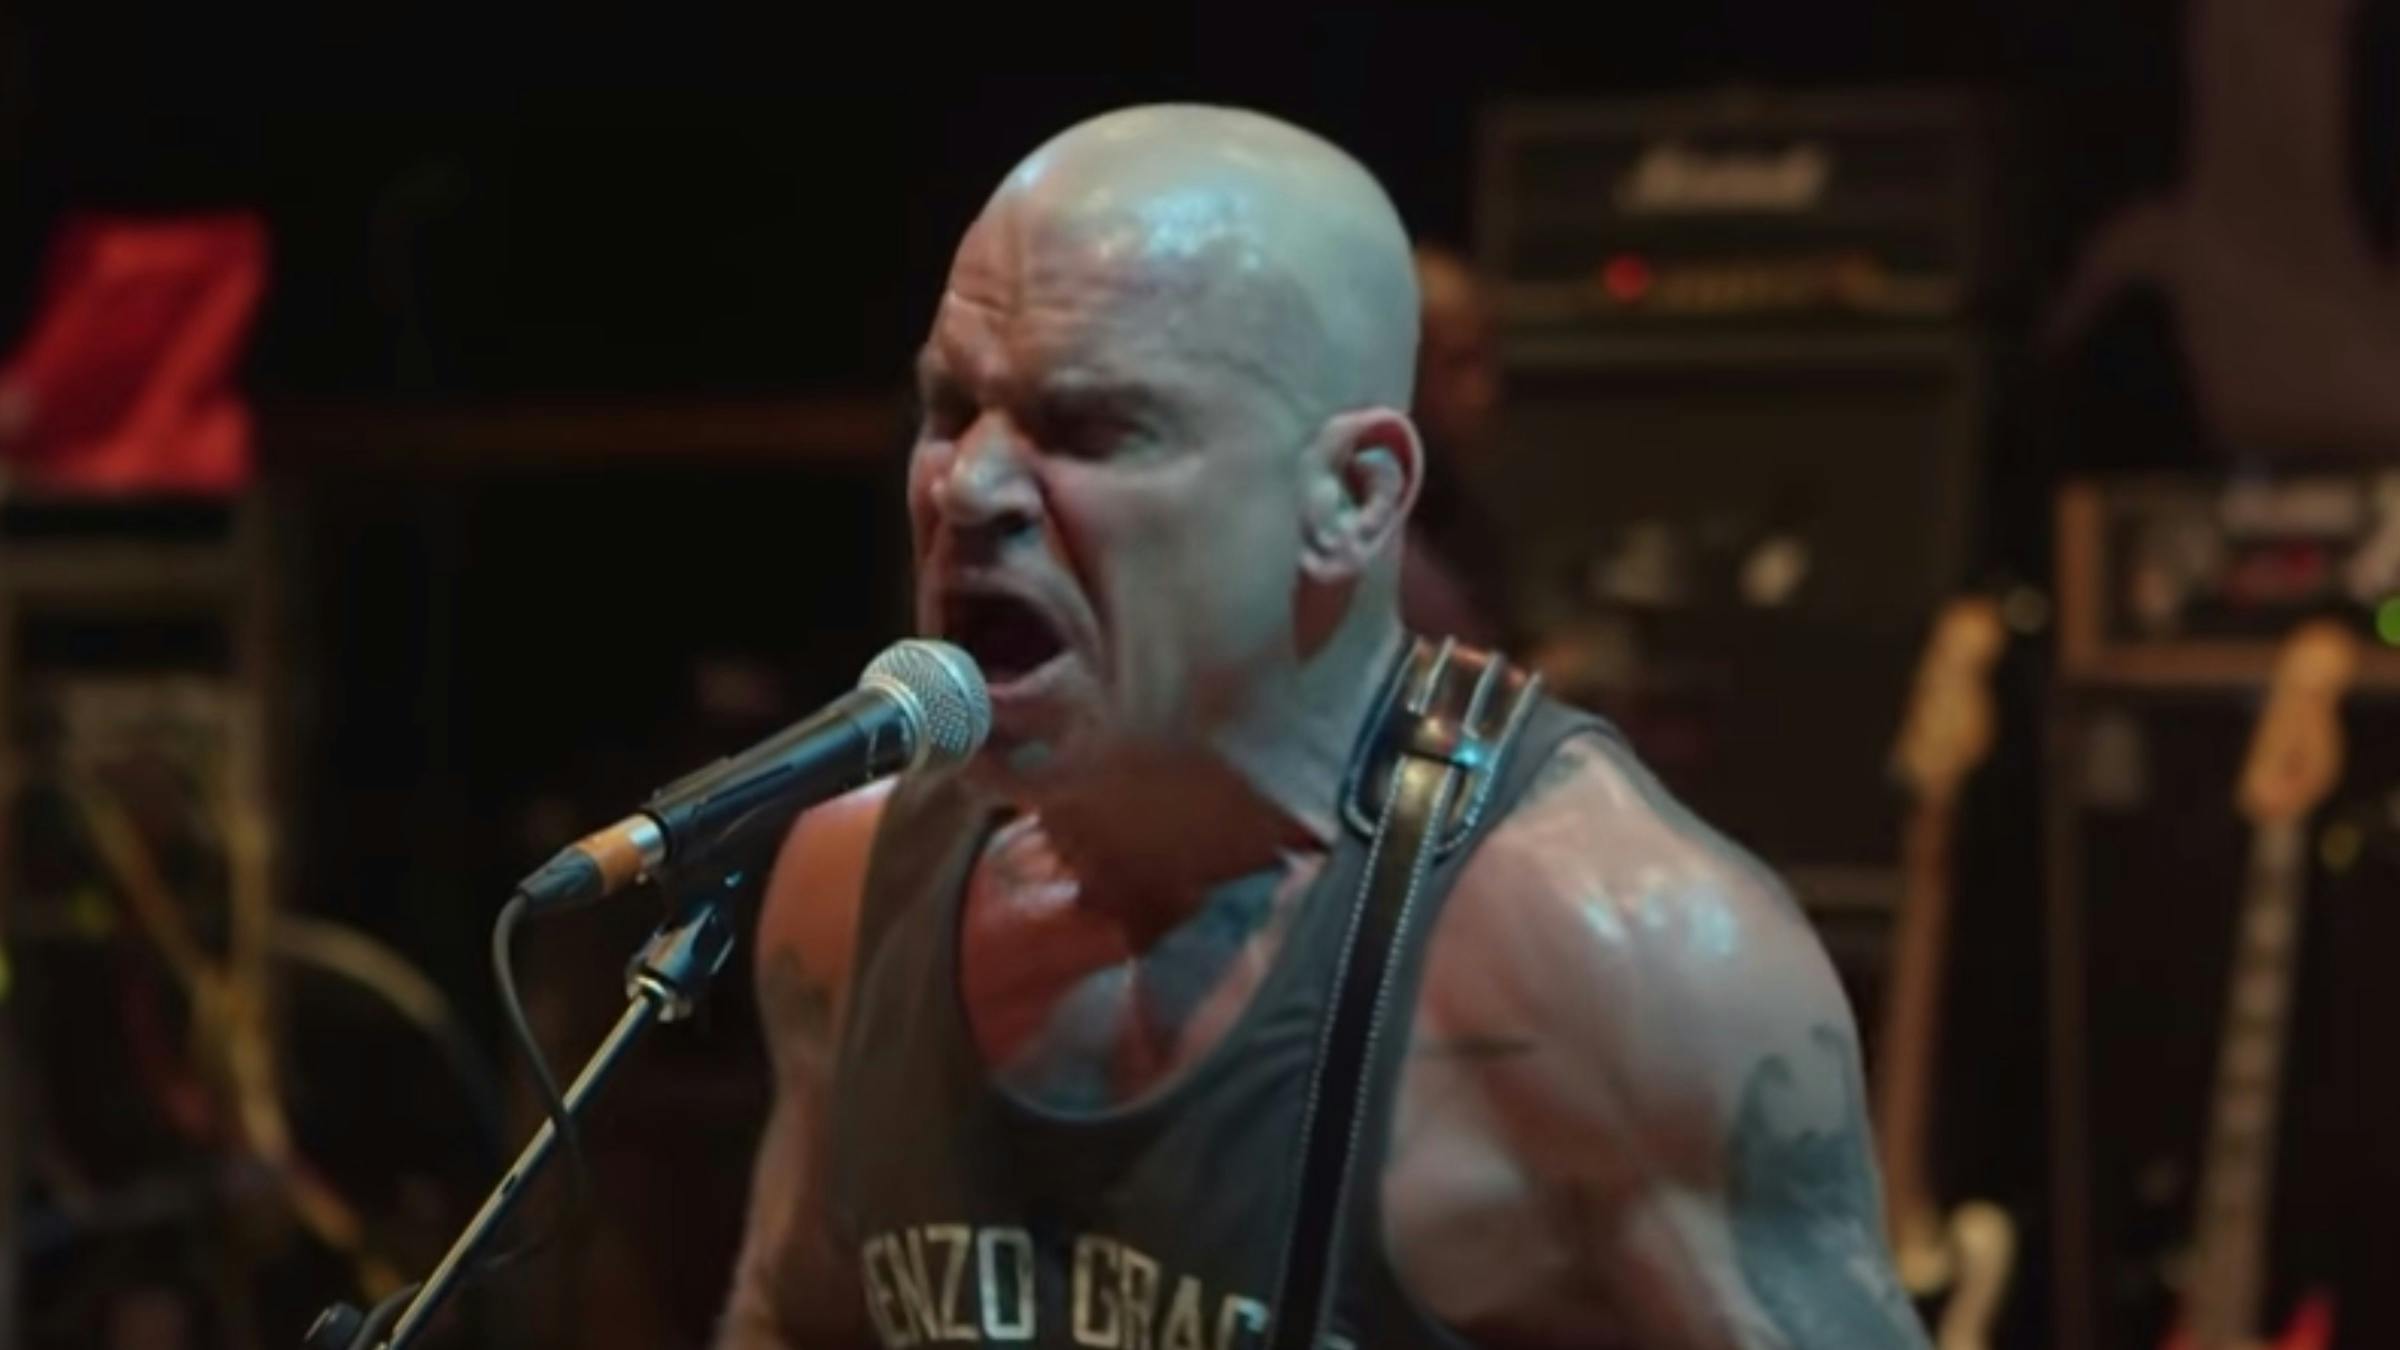 Watch Cro-Mags' Crushing Livestreamed NYC Set In Full